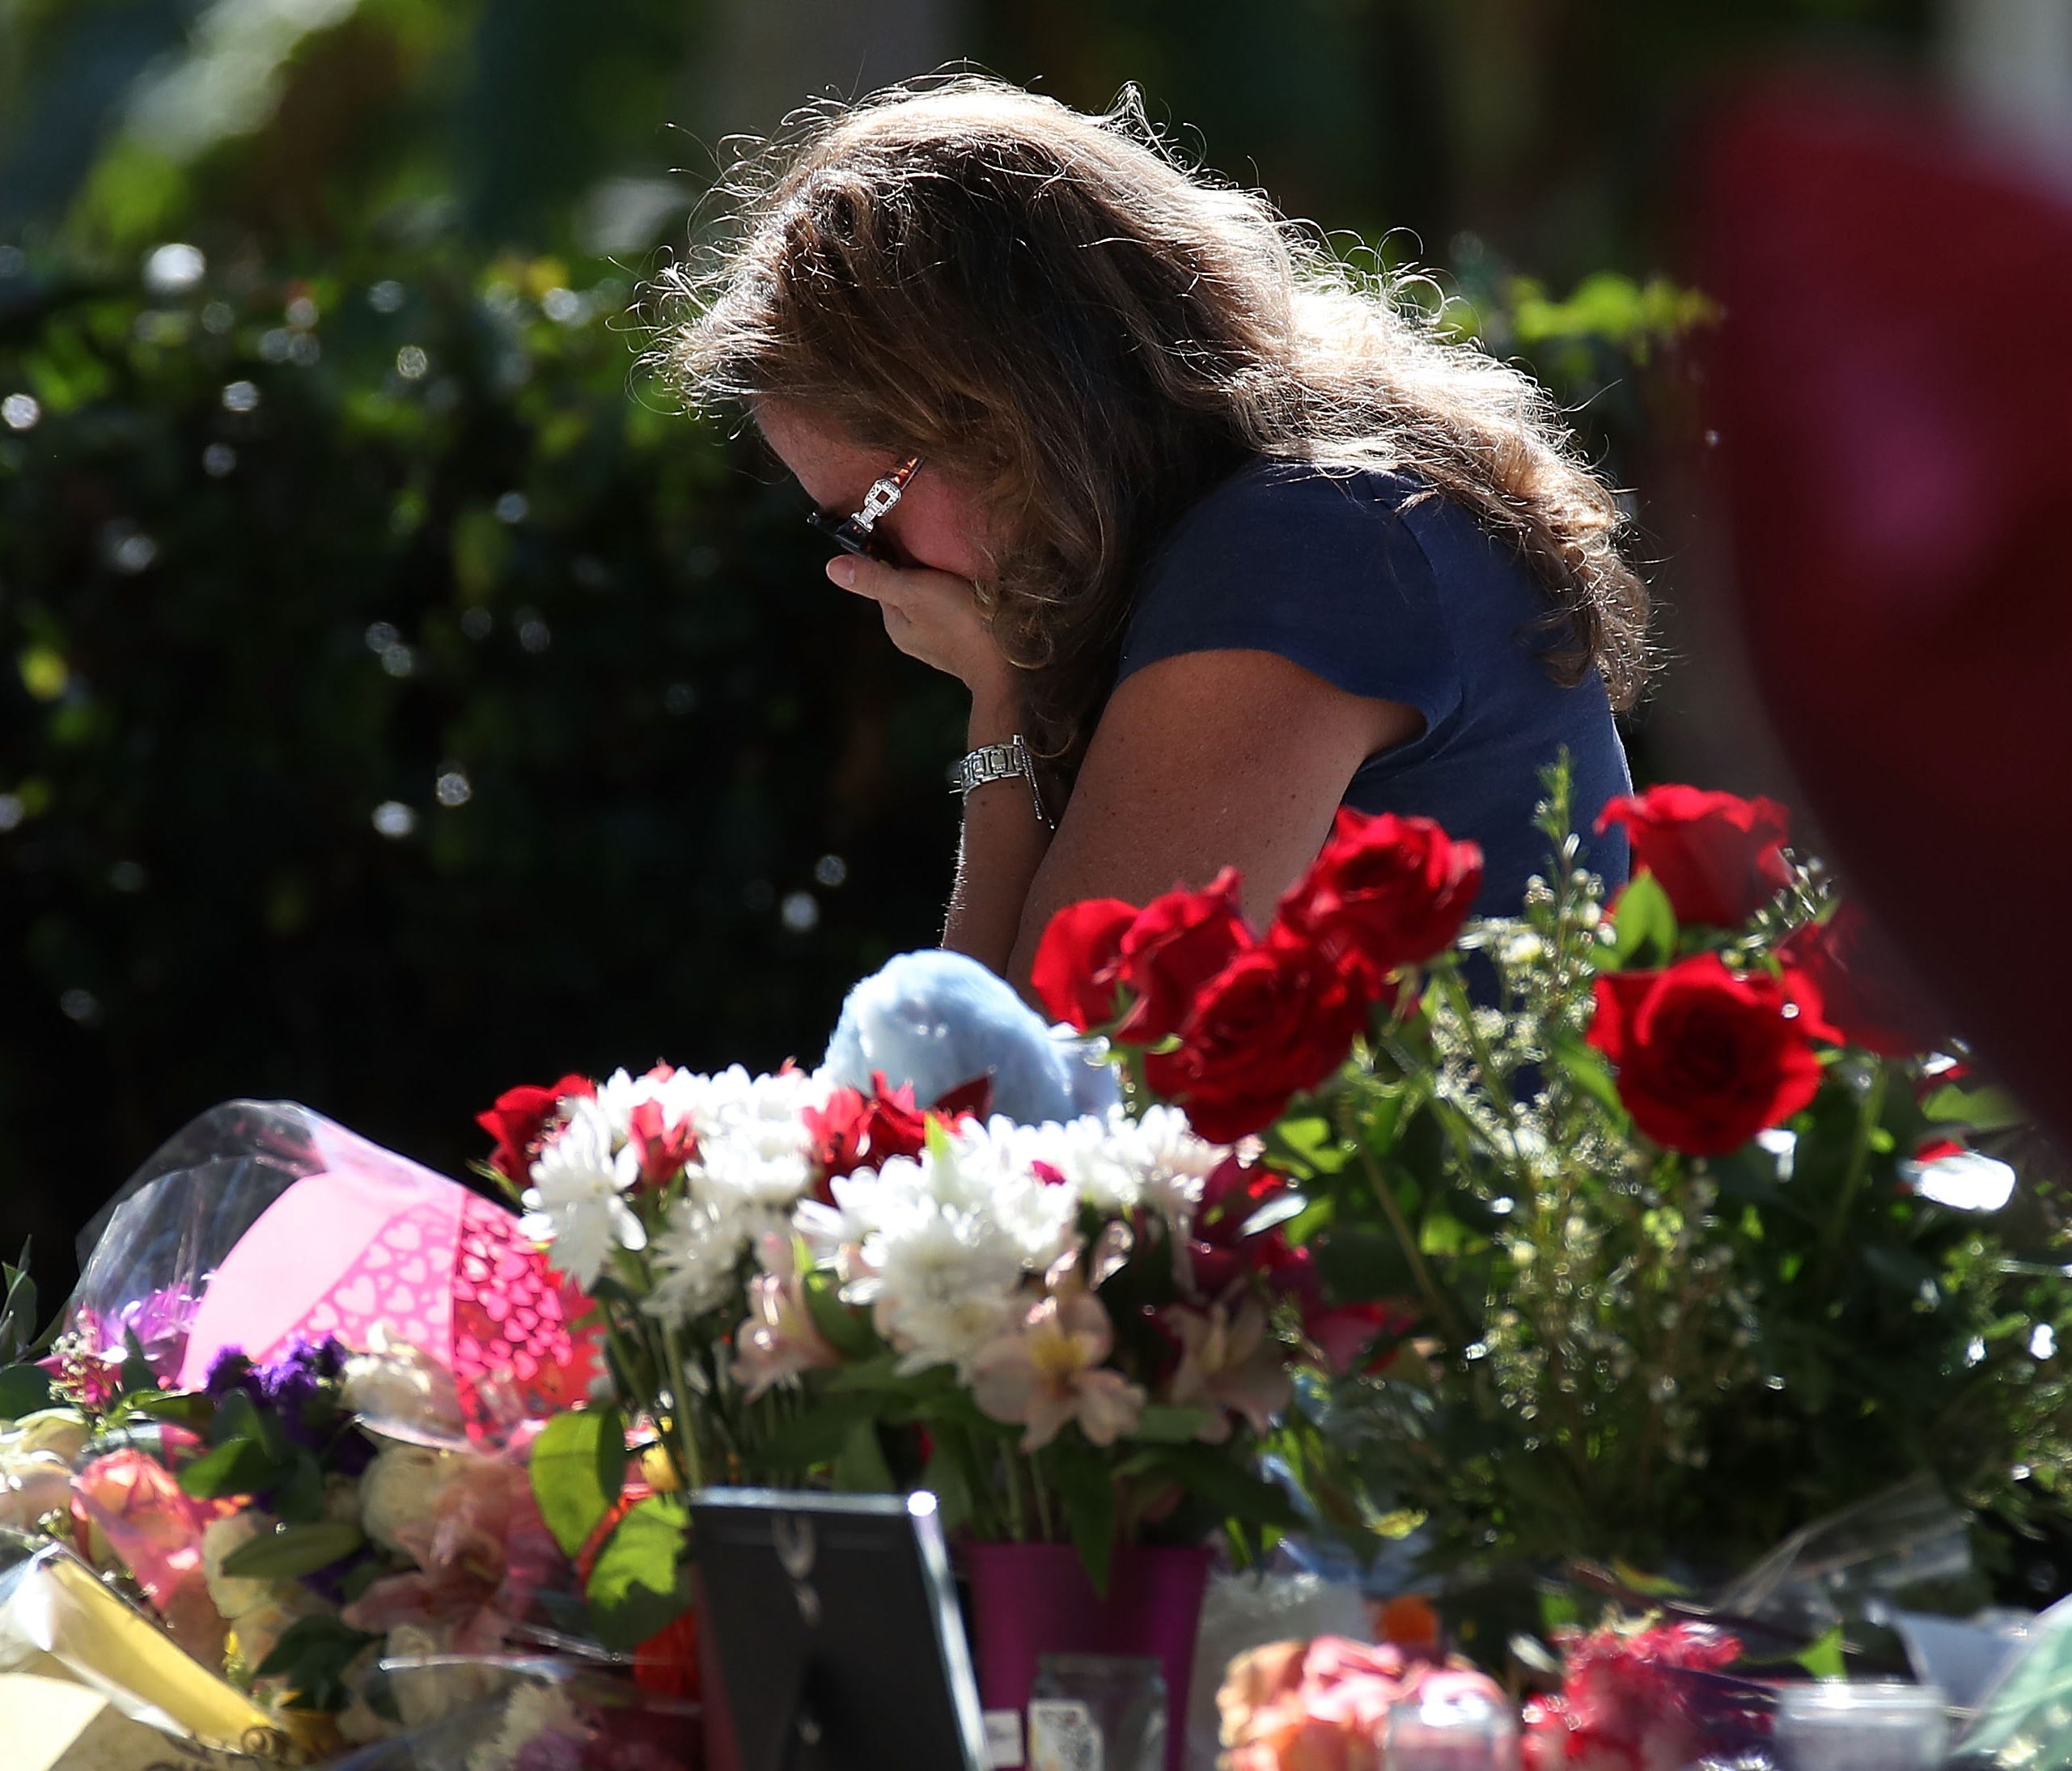 A woman becomes emotional while visiting a temporary memorial at Pine Trails Park on Feb. 17, 2018 in Parkland, Fla.